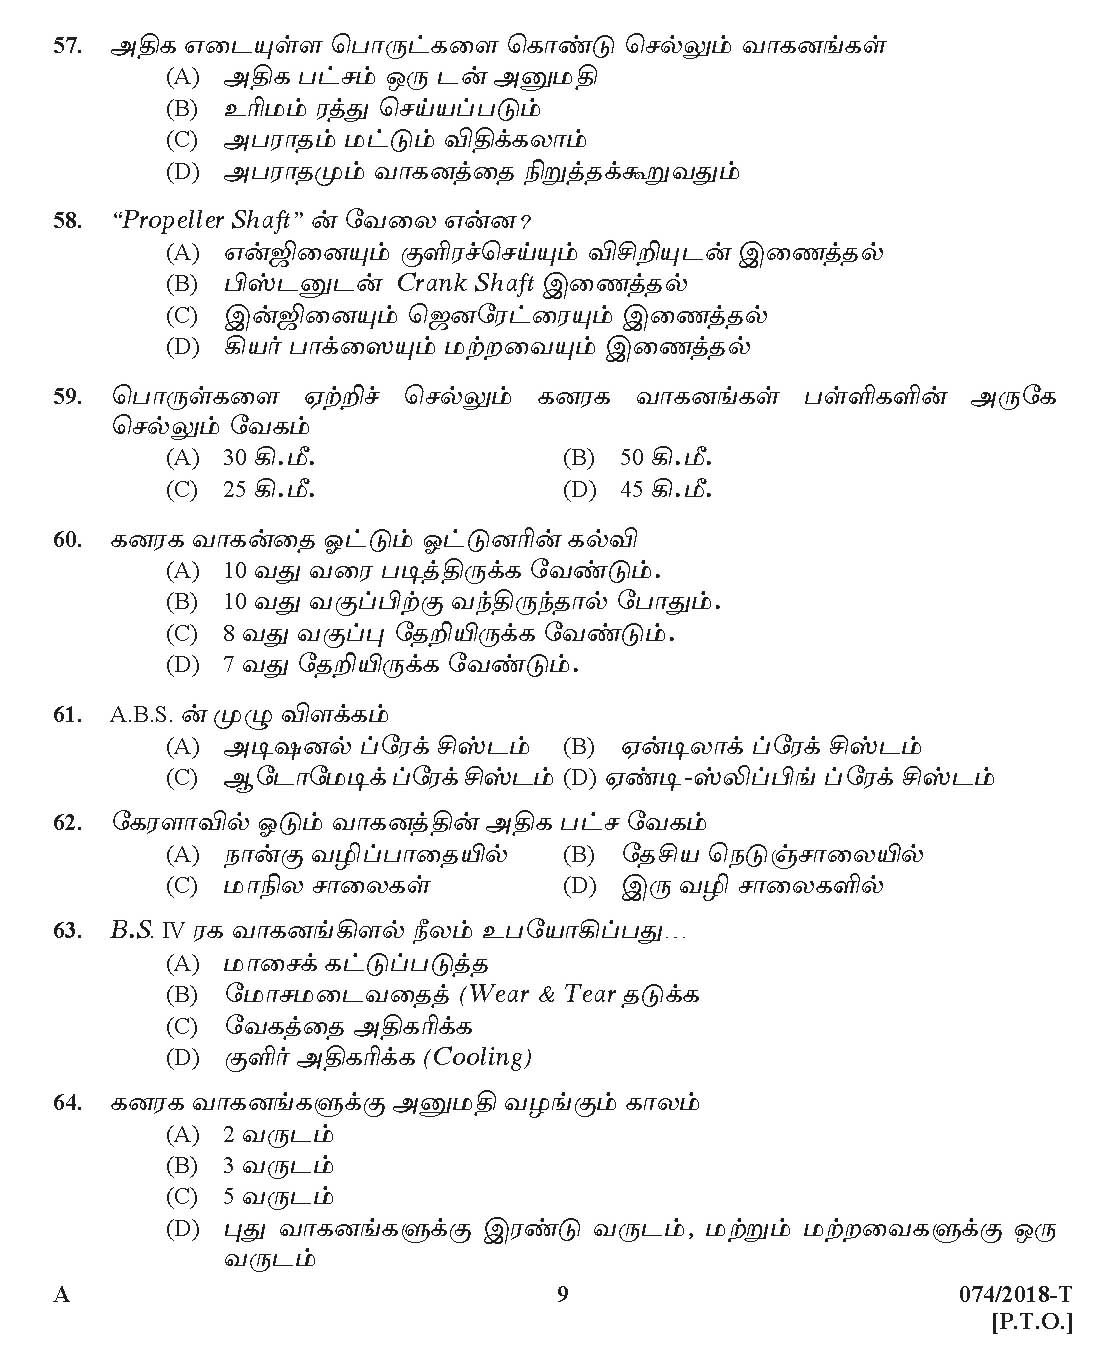 Kerala PSC Police Constable Driver Exam 2018 Question Paper Code 0742018 T 8